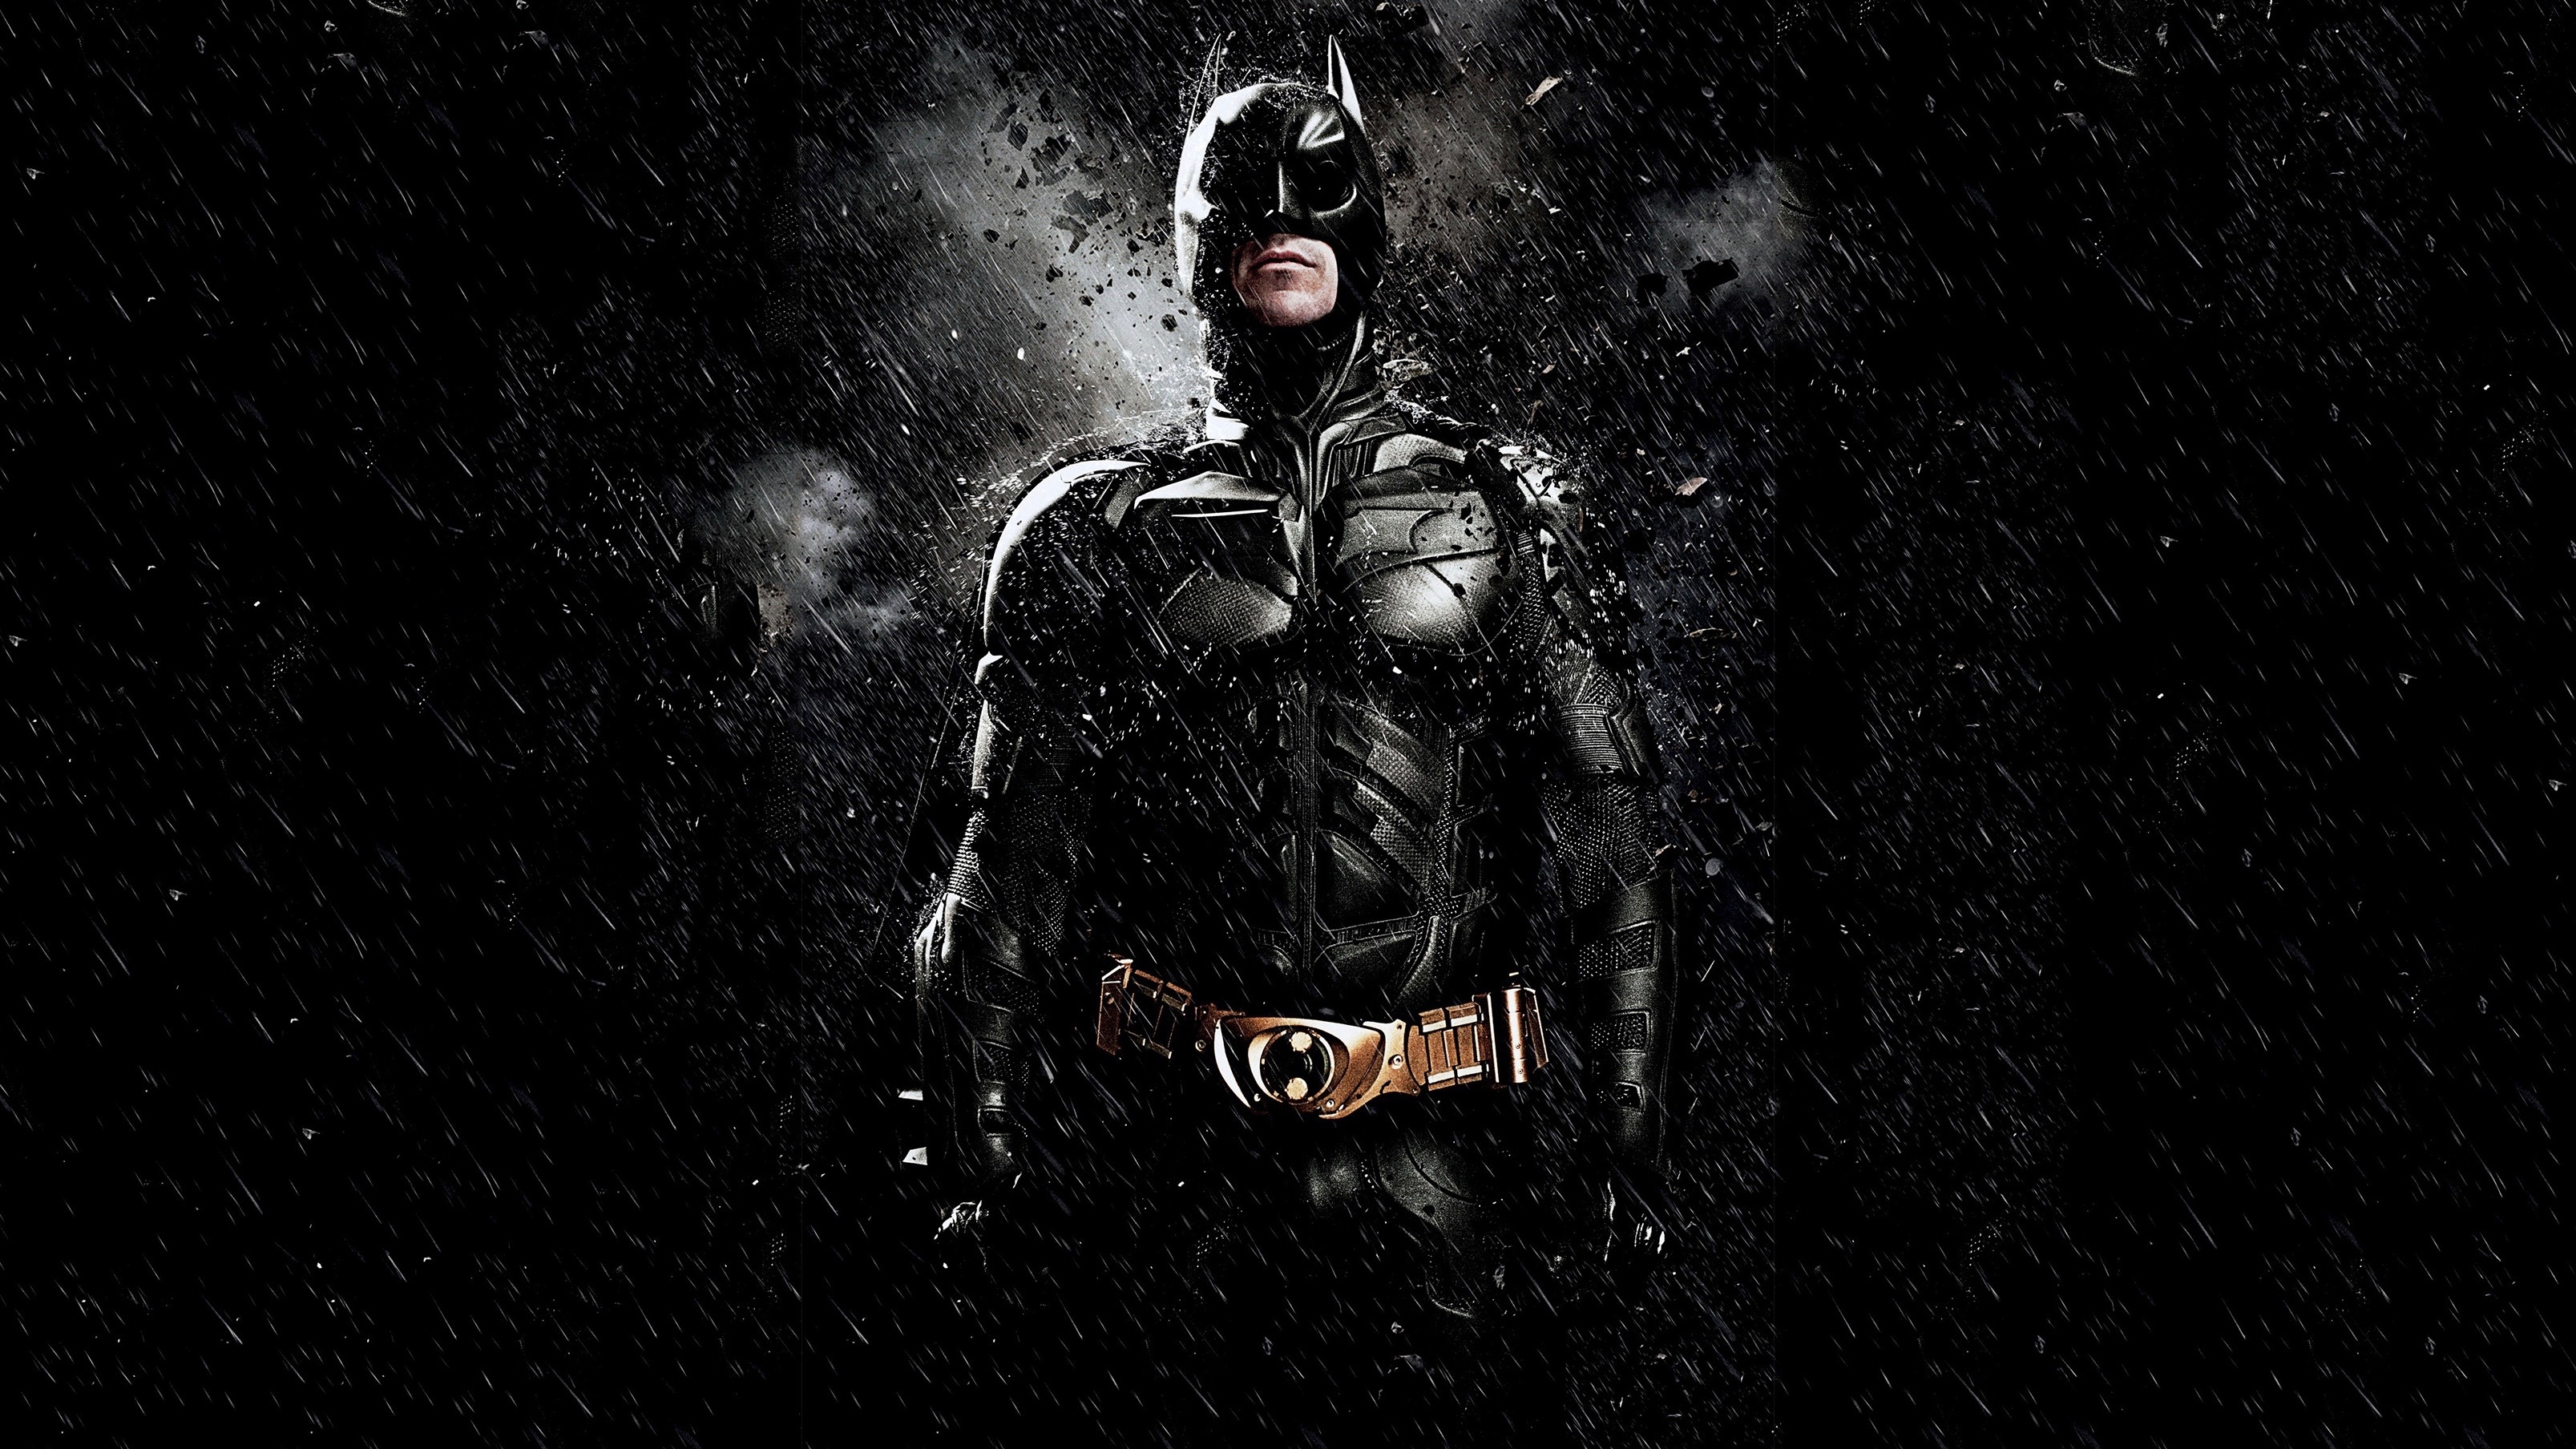 The Dark Knight Rises download the new version